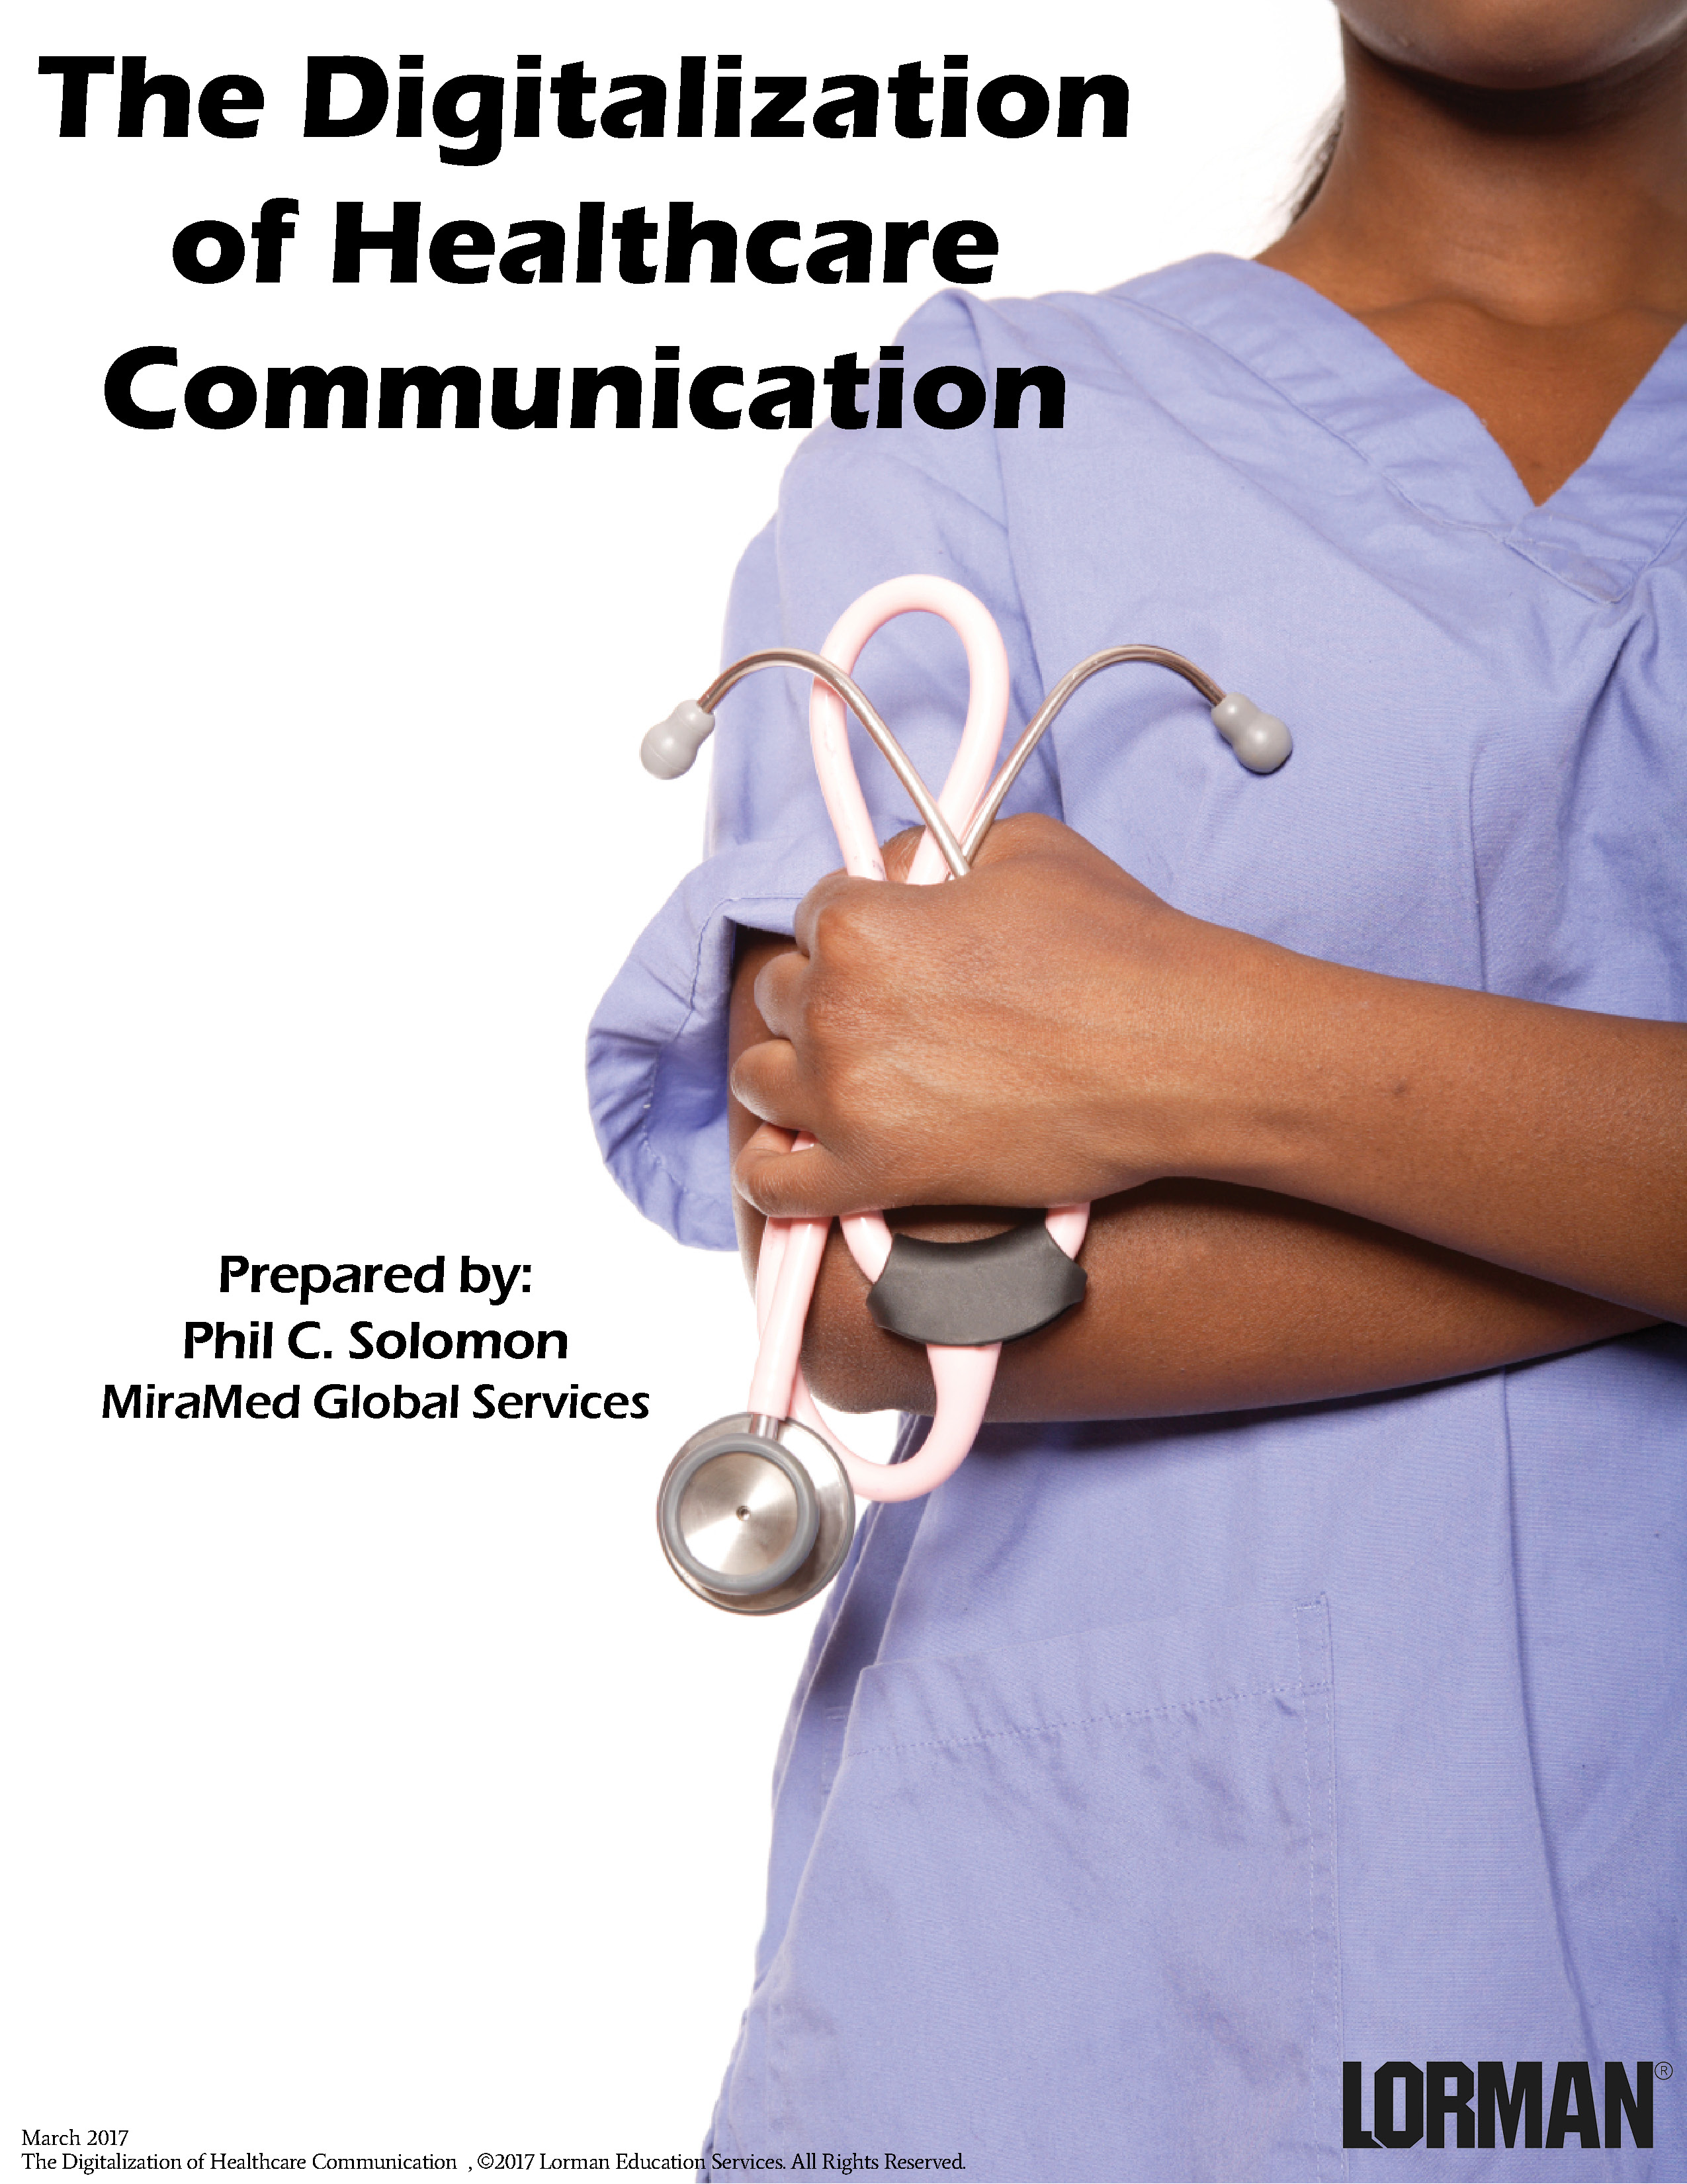 The Digitalization of Healthcare Communication